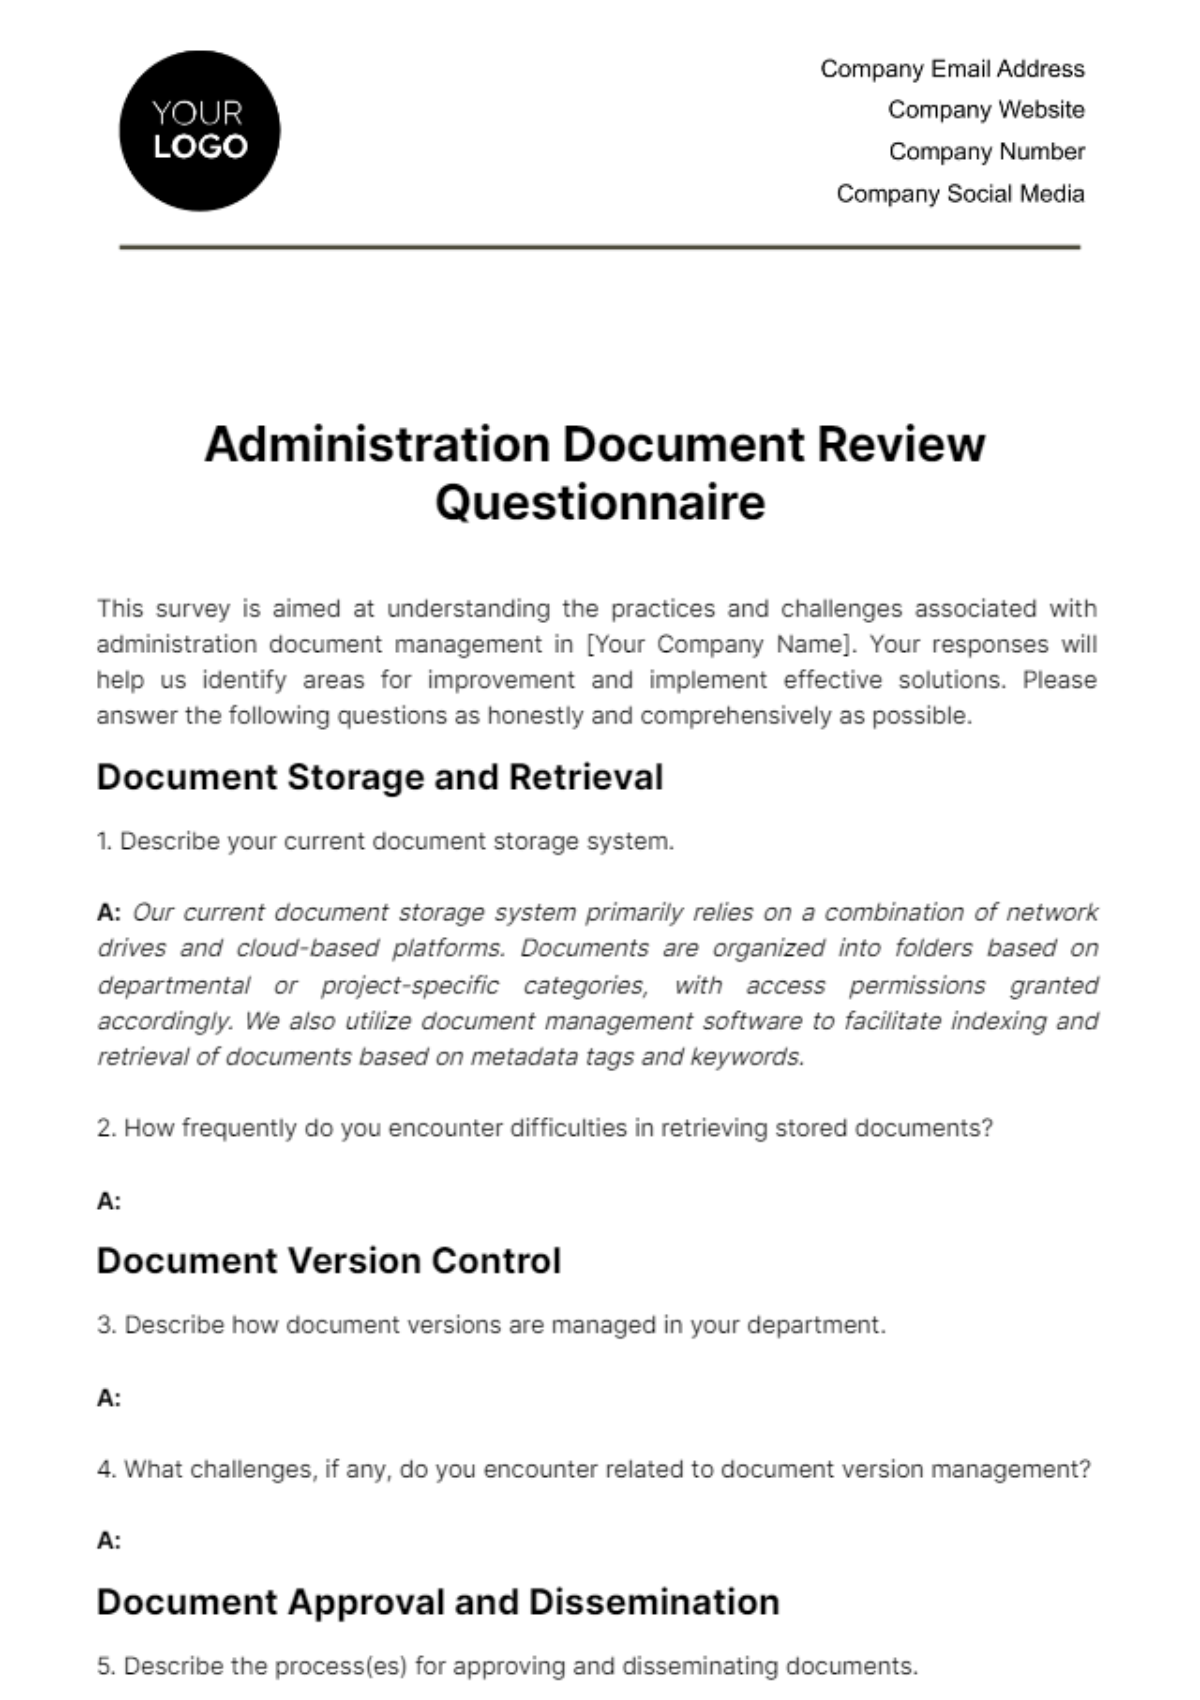 Free Administration Document Review Questionnaire Template